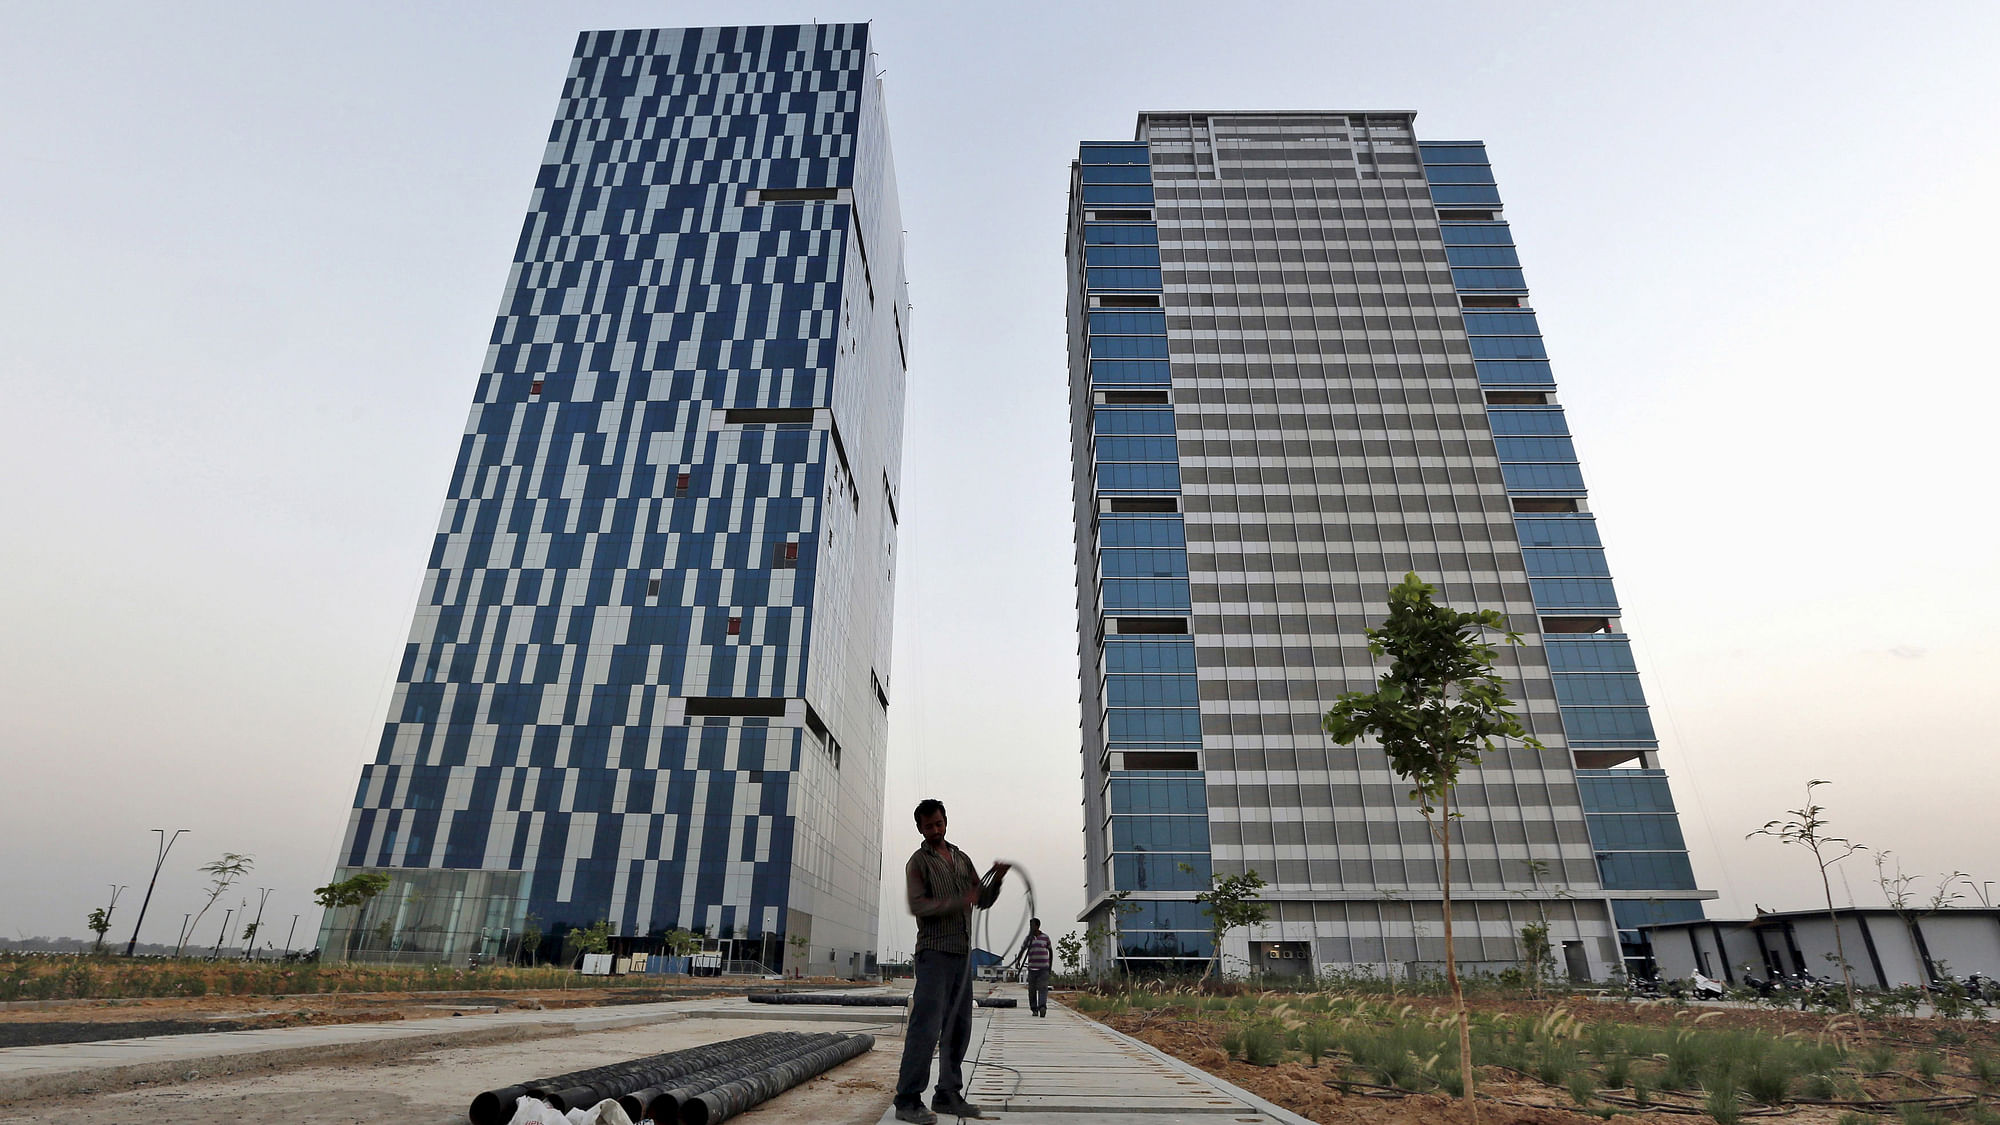 A worker folds the cable of a welding machine in front of two office buildings at the Gujarat International Finance Tec-City (GIFT) at Gandhinagar, in the western Indian state of Gujarat, April 10, 2015.